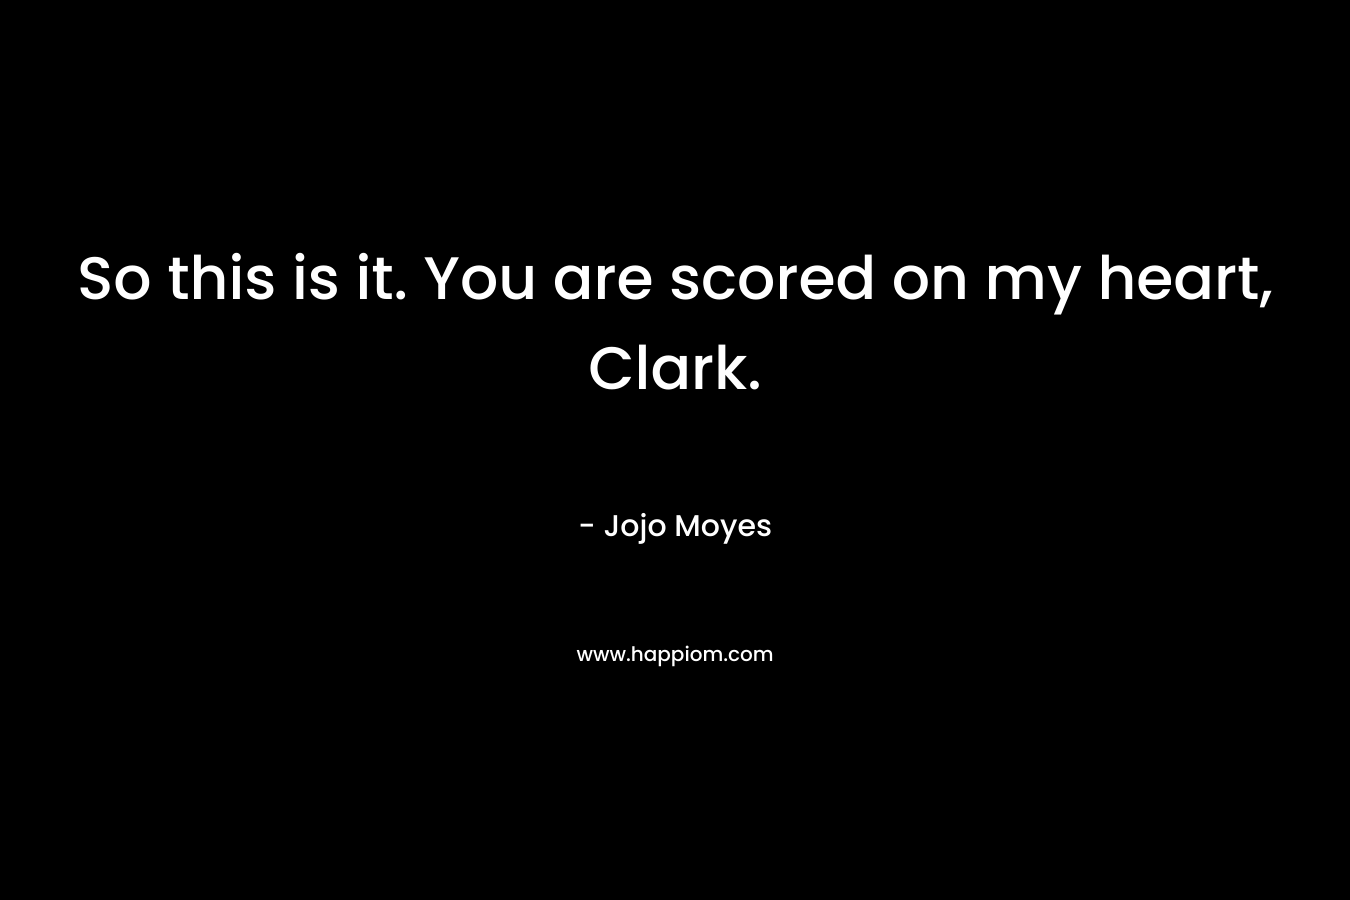 So this is it. You are scored on my heart, Clark.